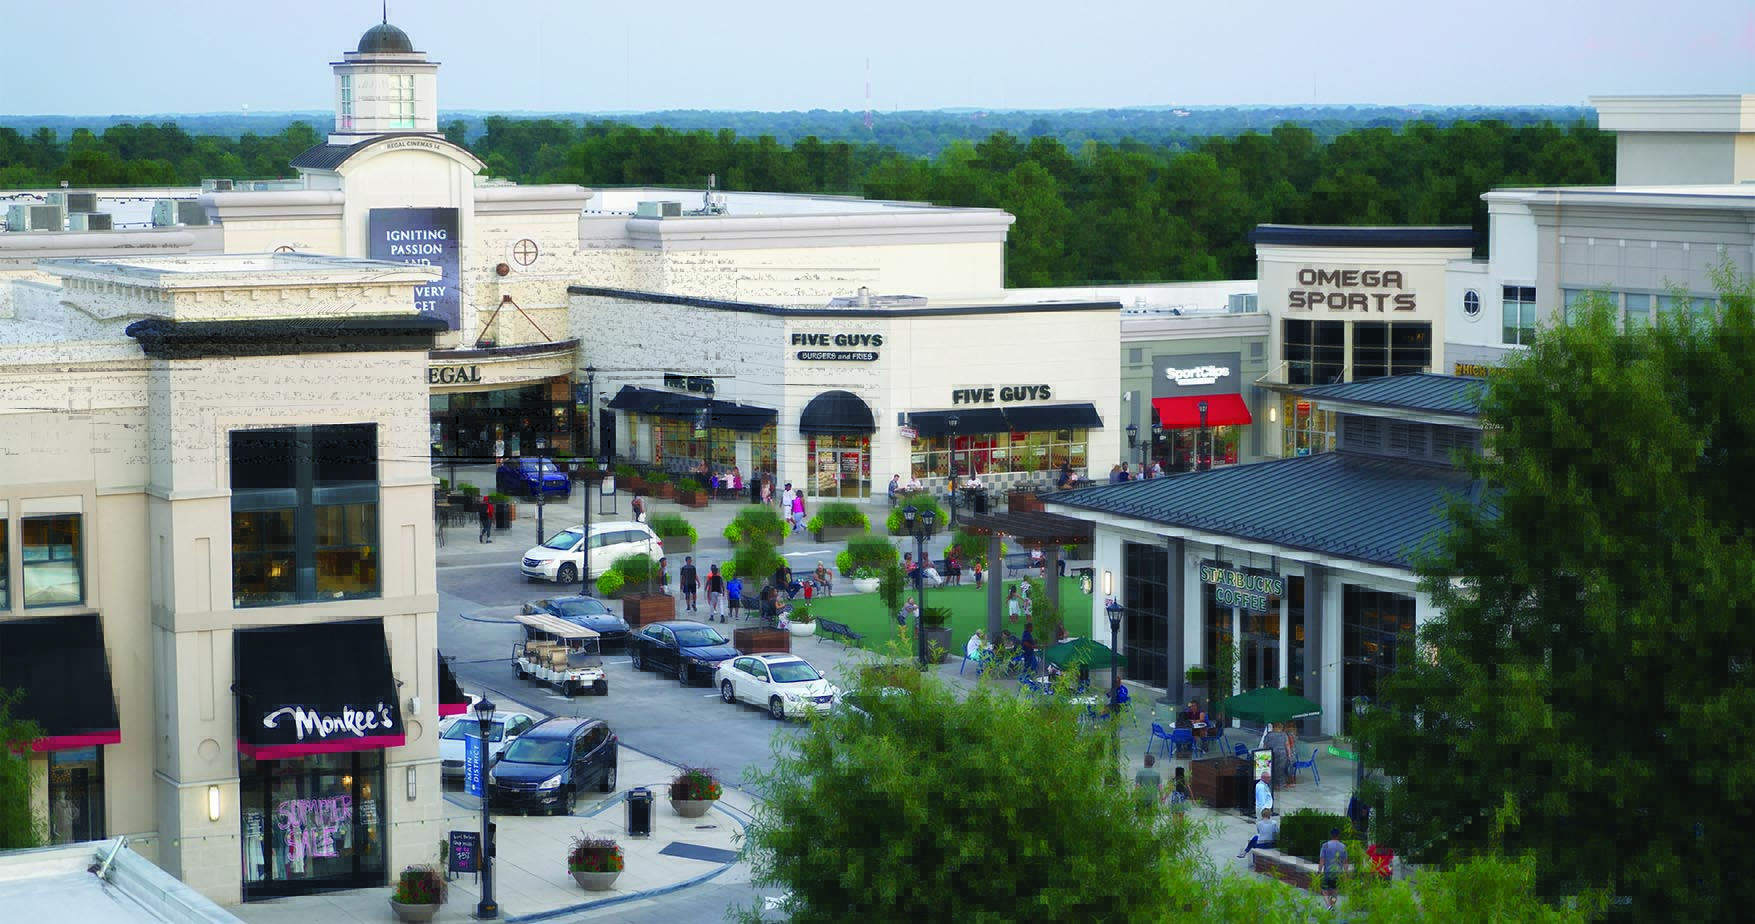 Vine North Hills - View of the neighborhood, specifically Regal Cinemas, omega sports, and five guys